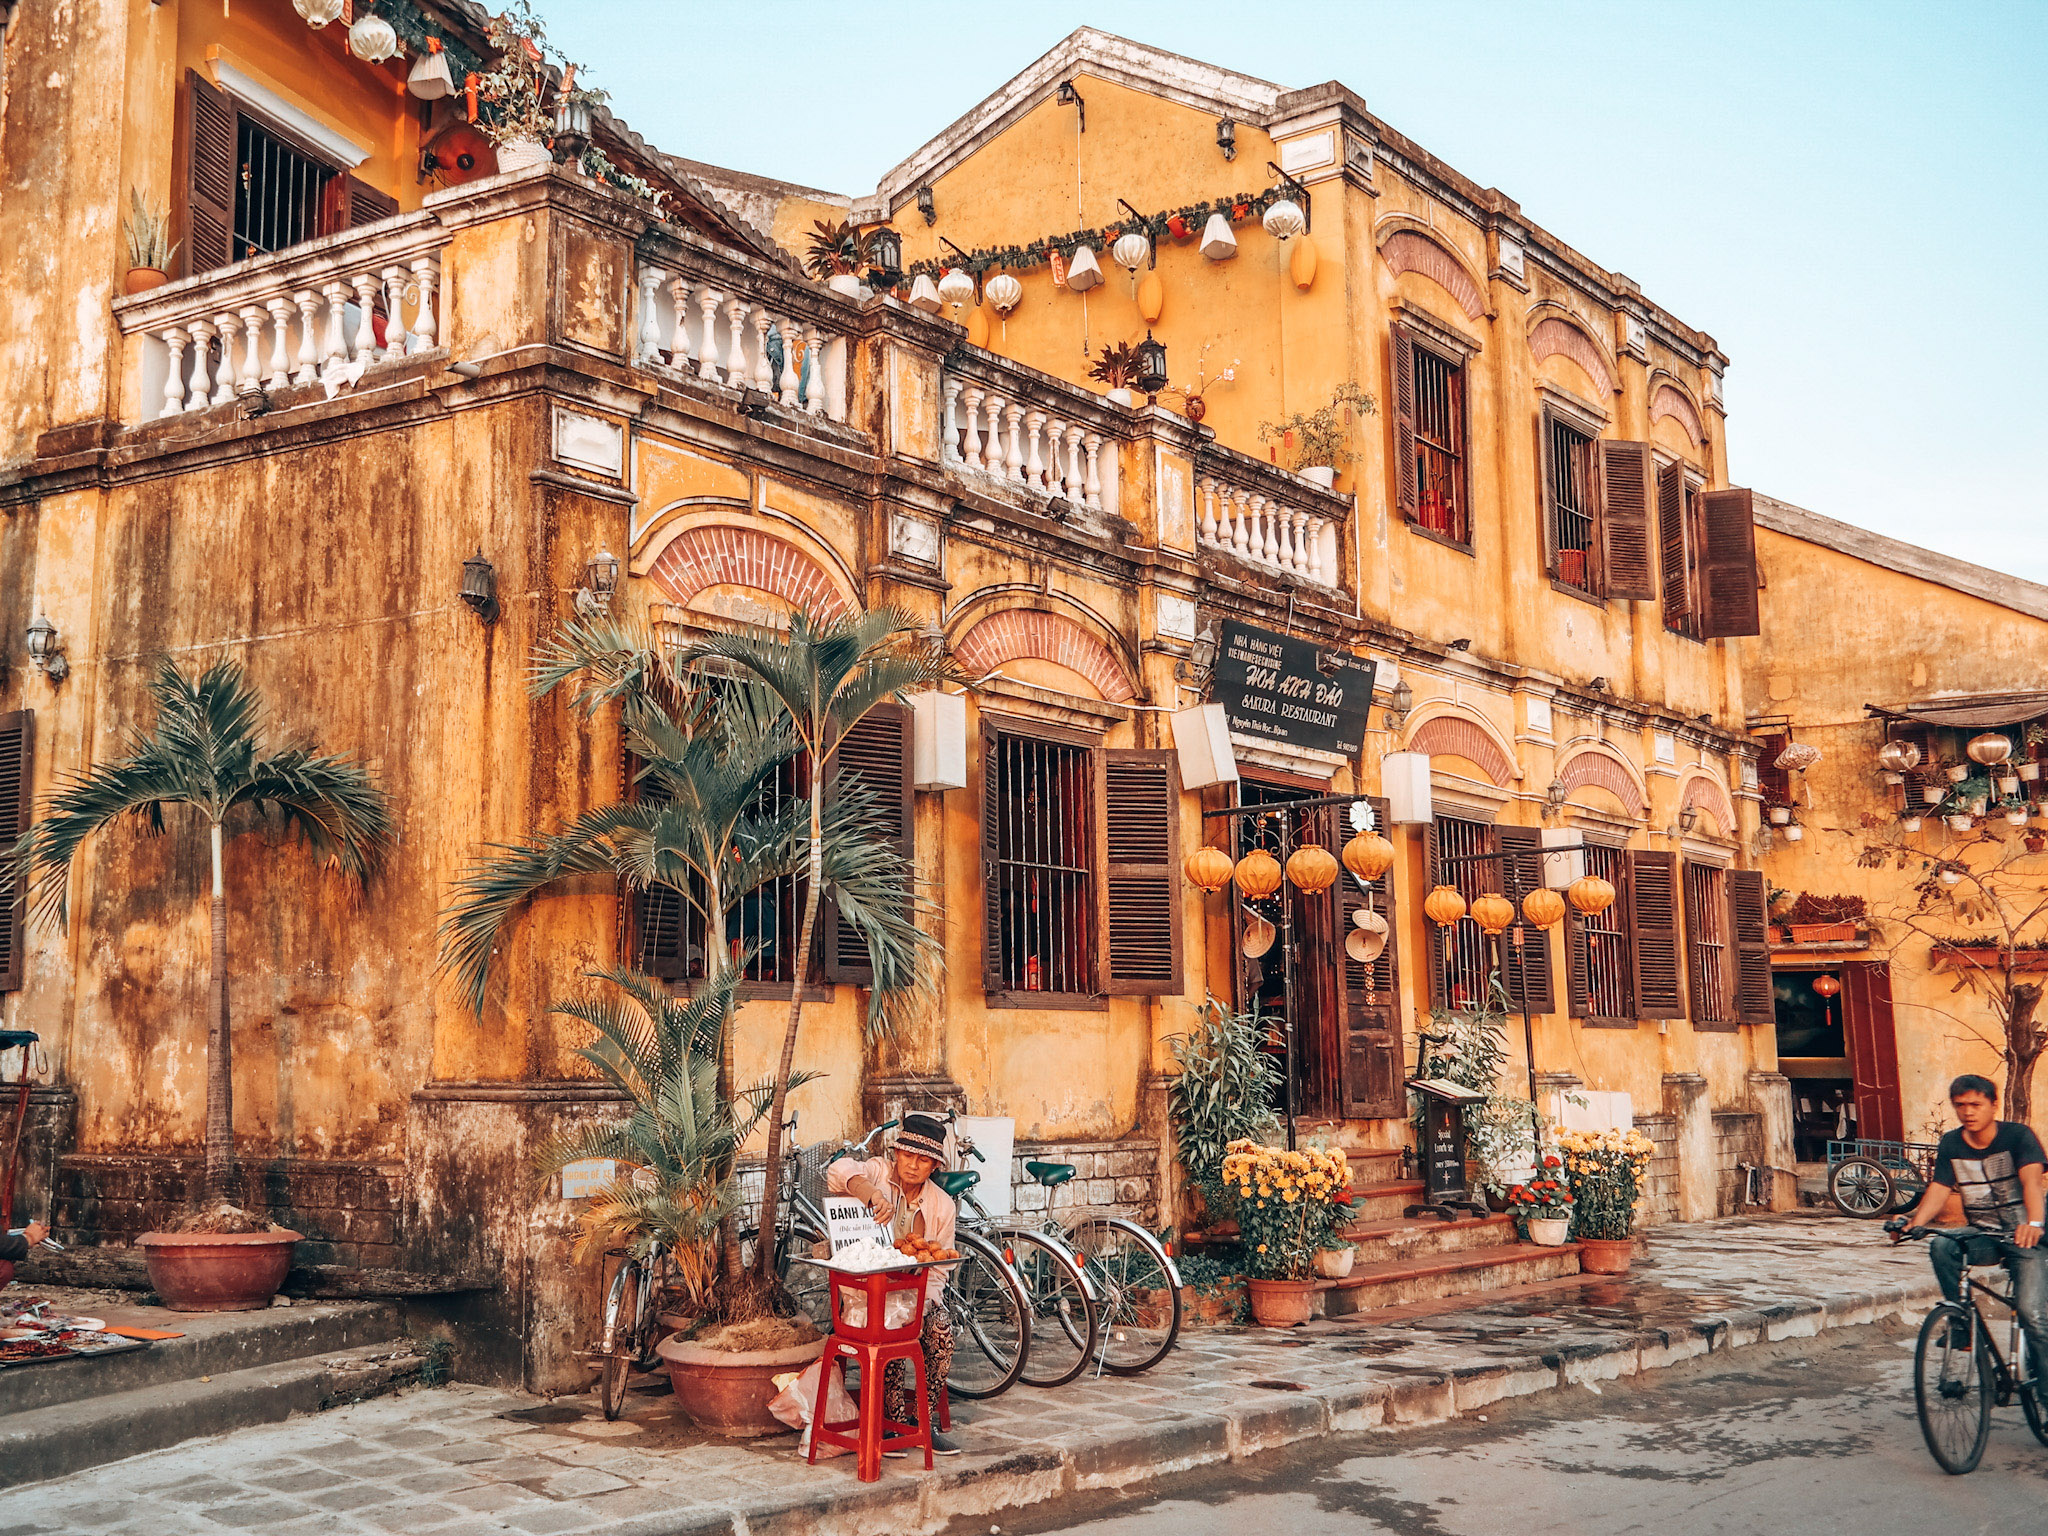 Hoi An highlights: favorite restaurants, sights & things to do